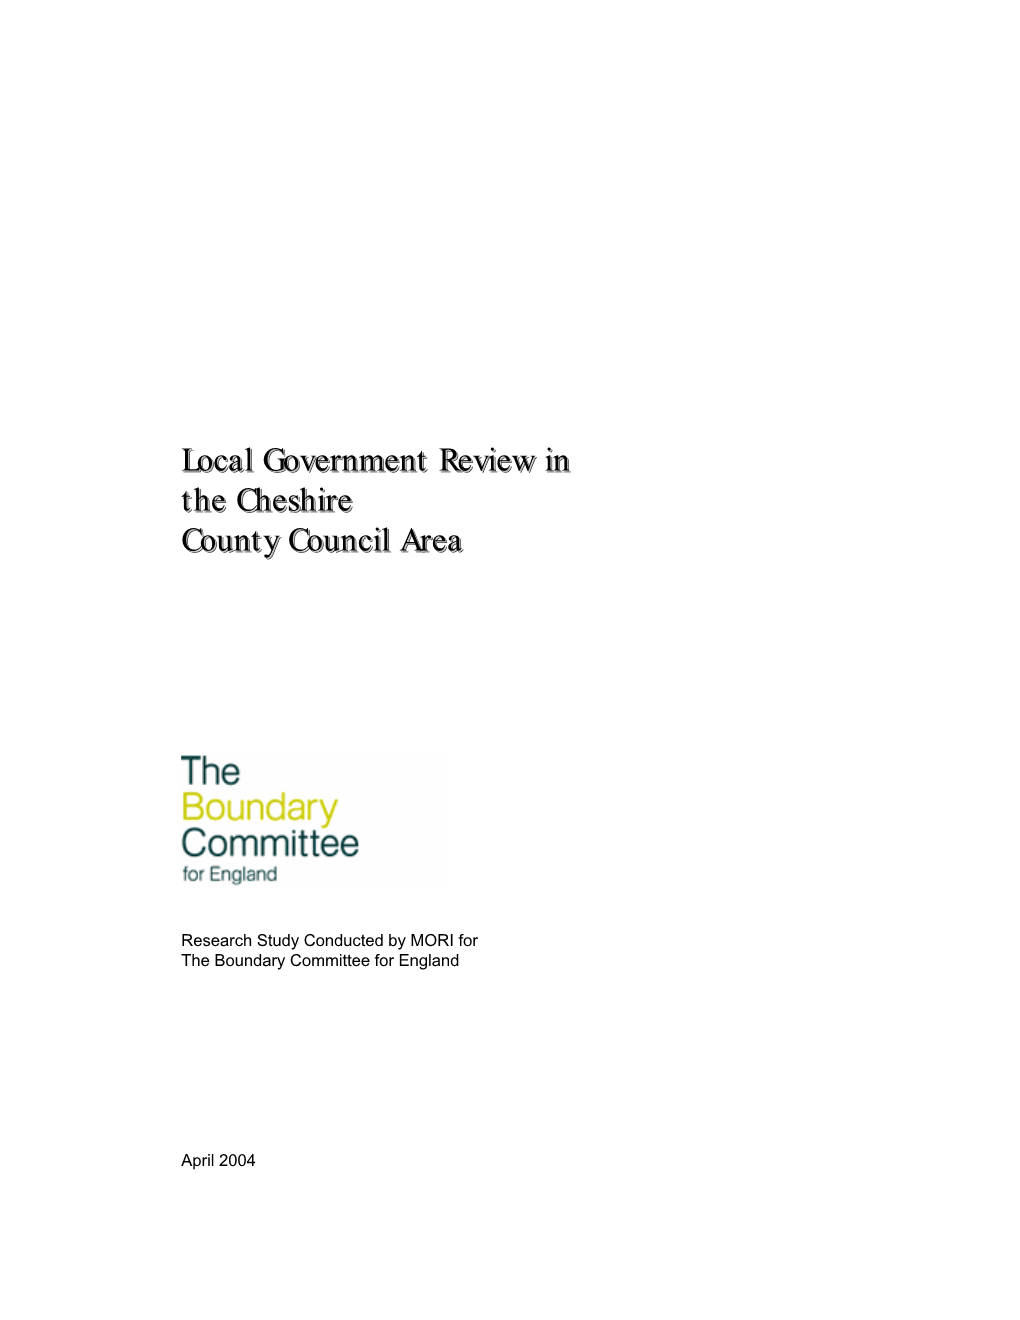 Local Government Review in the Cheshire County Council Area